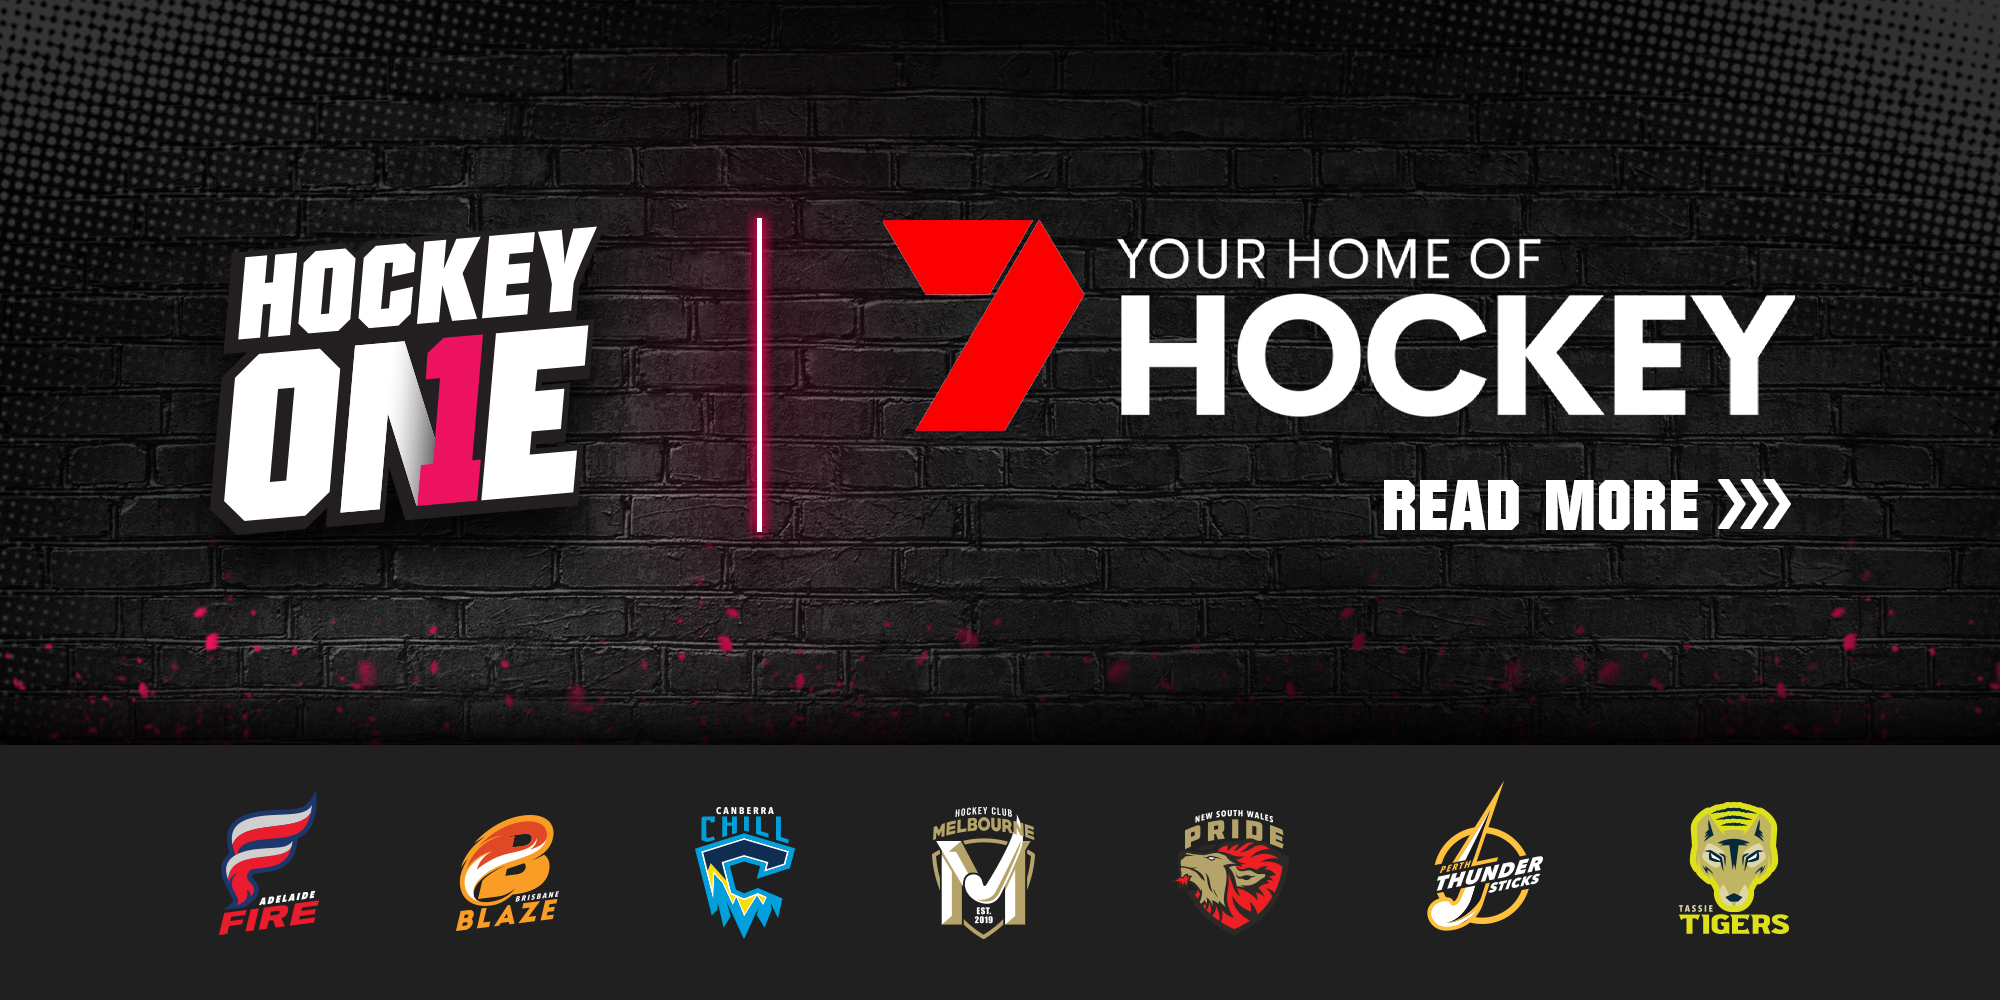 Hockey One League now LIVE and free on 7plus Hockey One